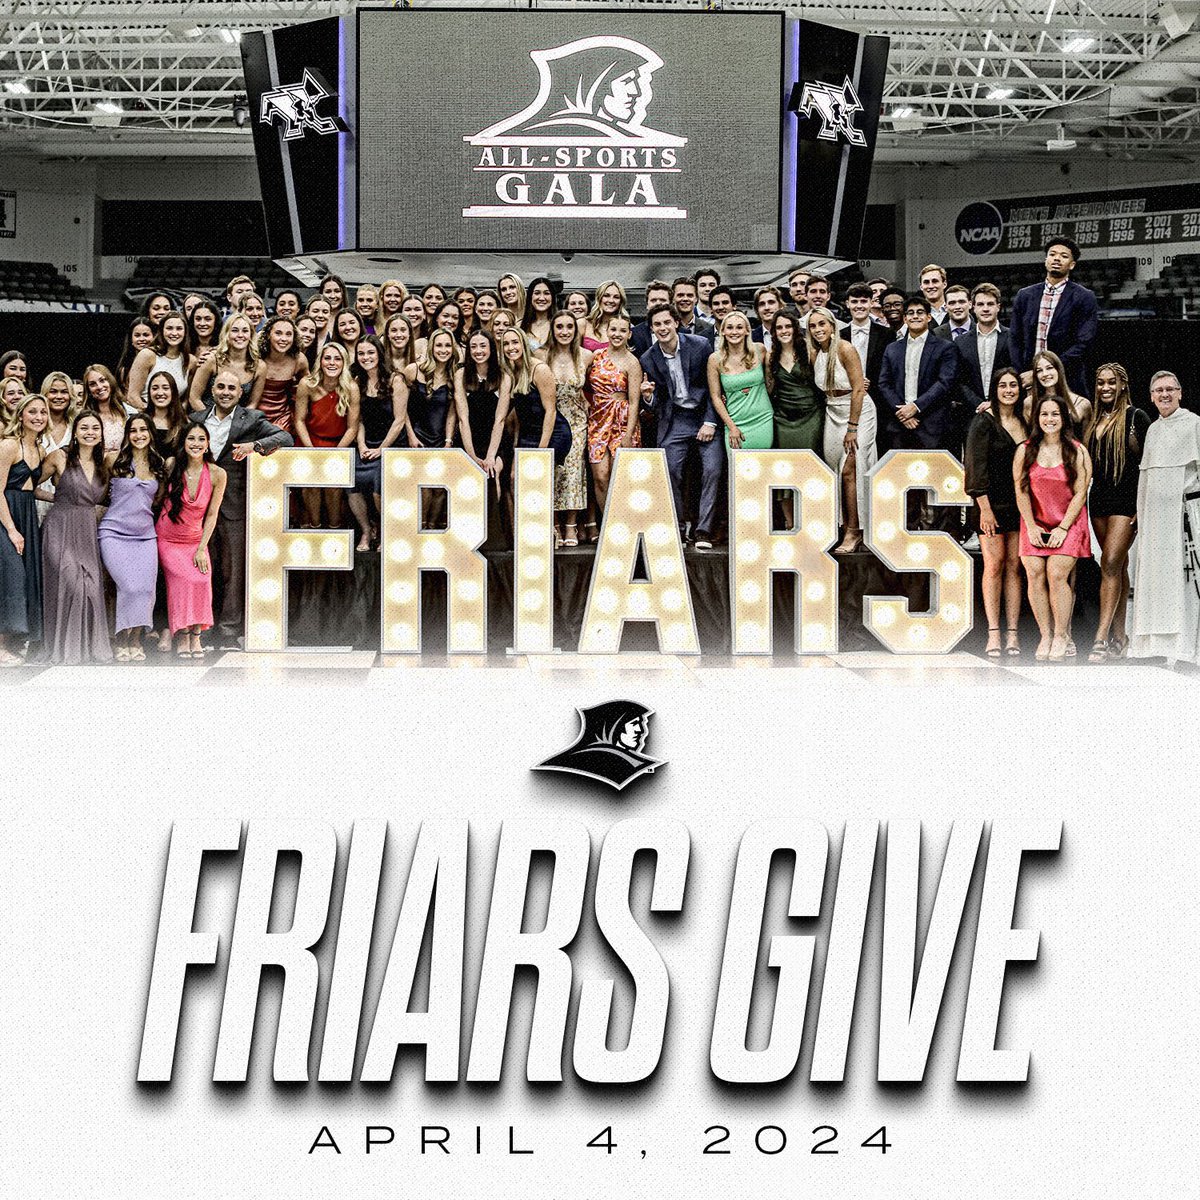 Today is Friars Give. Consider making a gift to support Men’s Soccer! Thanks to the Athletic Director's Challenge, the program with the most gifts will receive an additional $10,000 in support. We need your help! donate.friarsgive.org  #gofriars #friarsgive